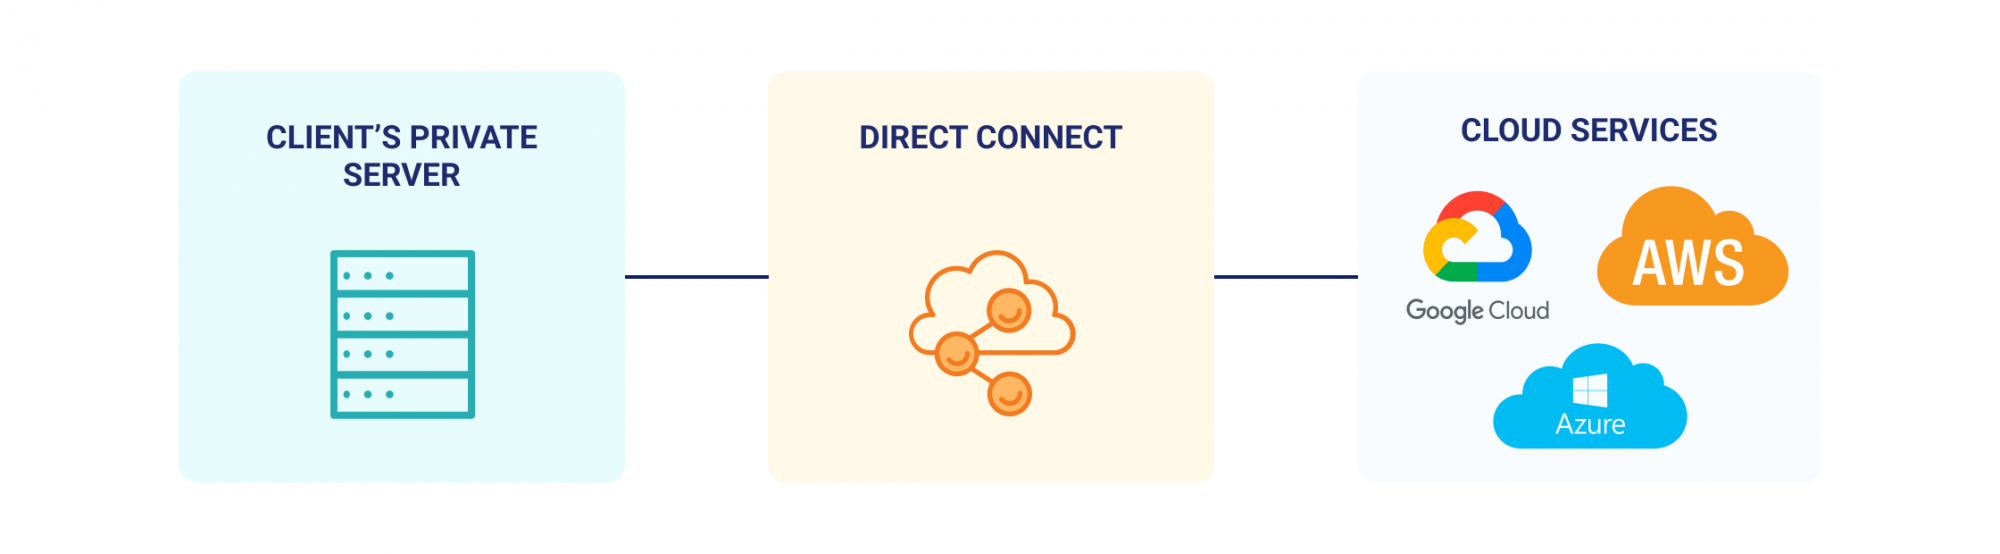 How cloud direct connect works